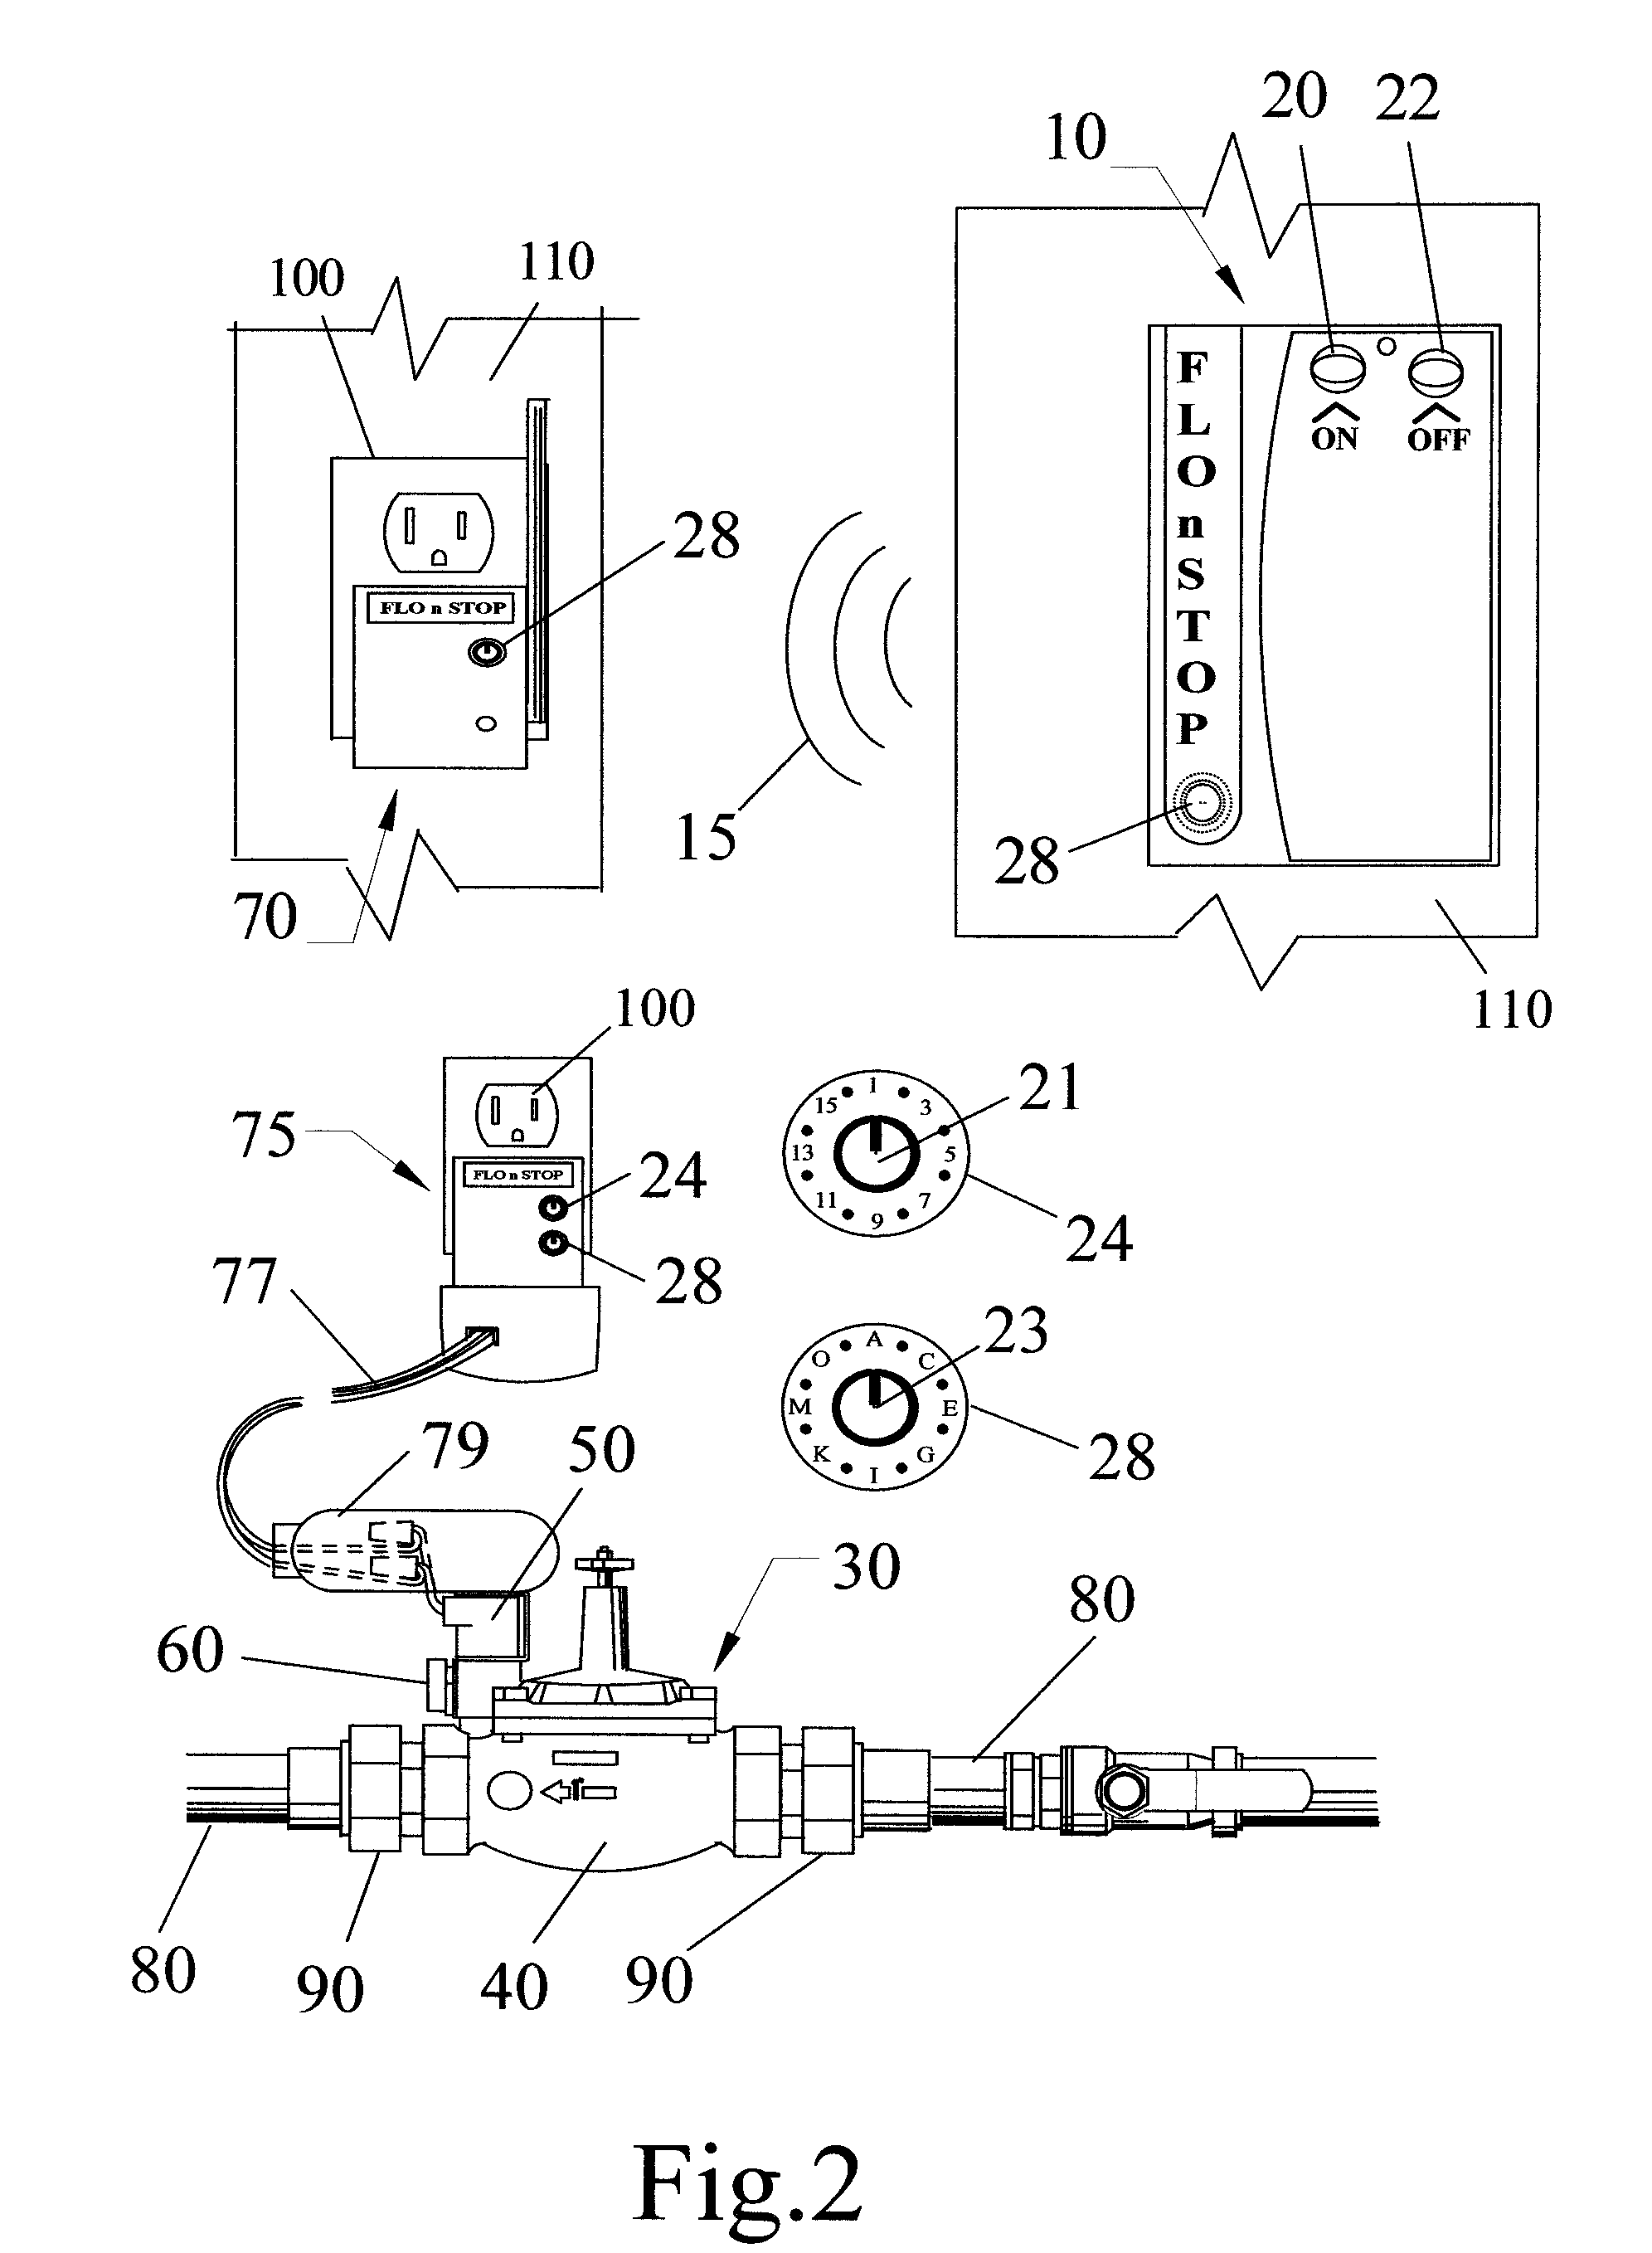 Water supply control apparatus and method for use in homes or other structures